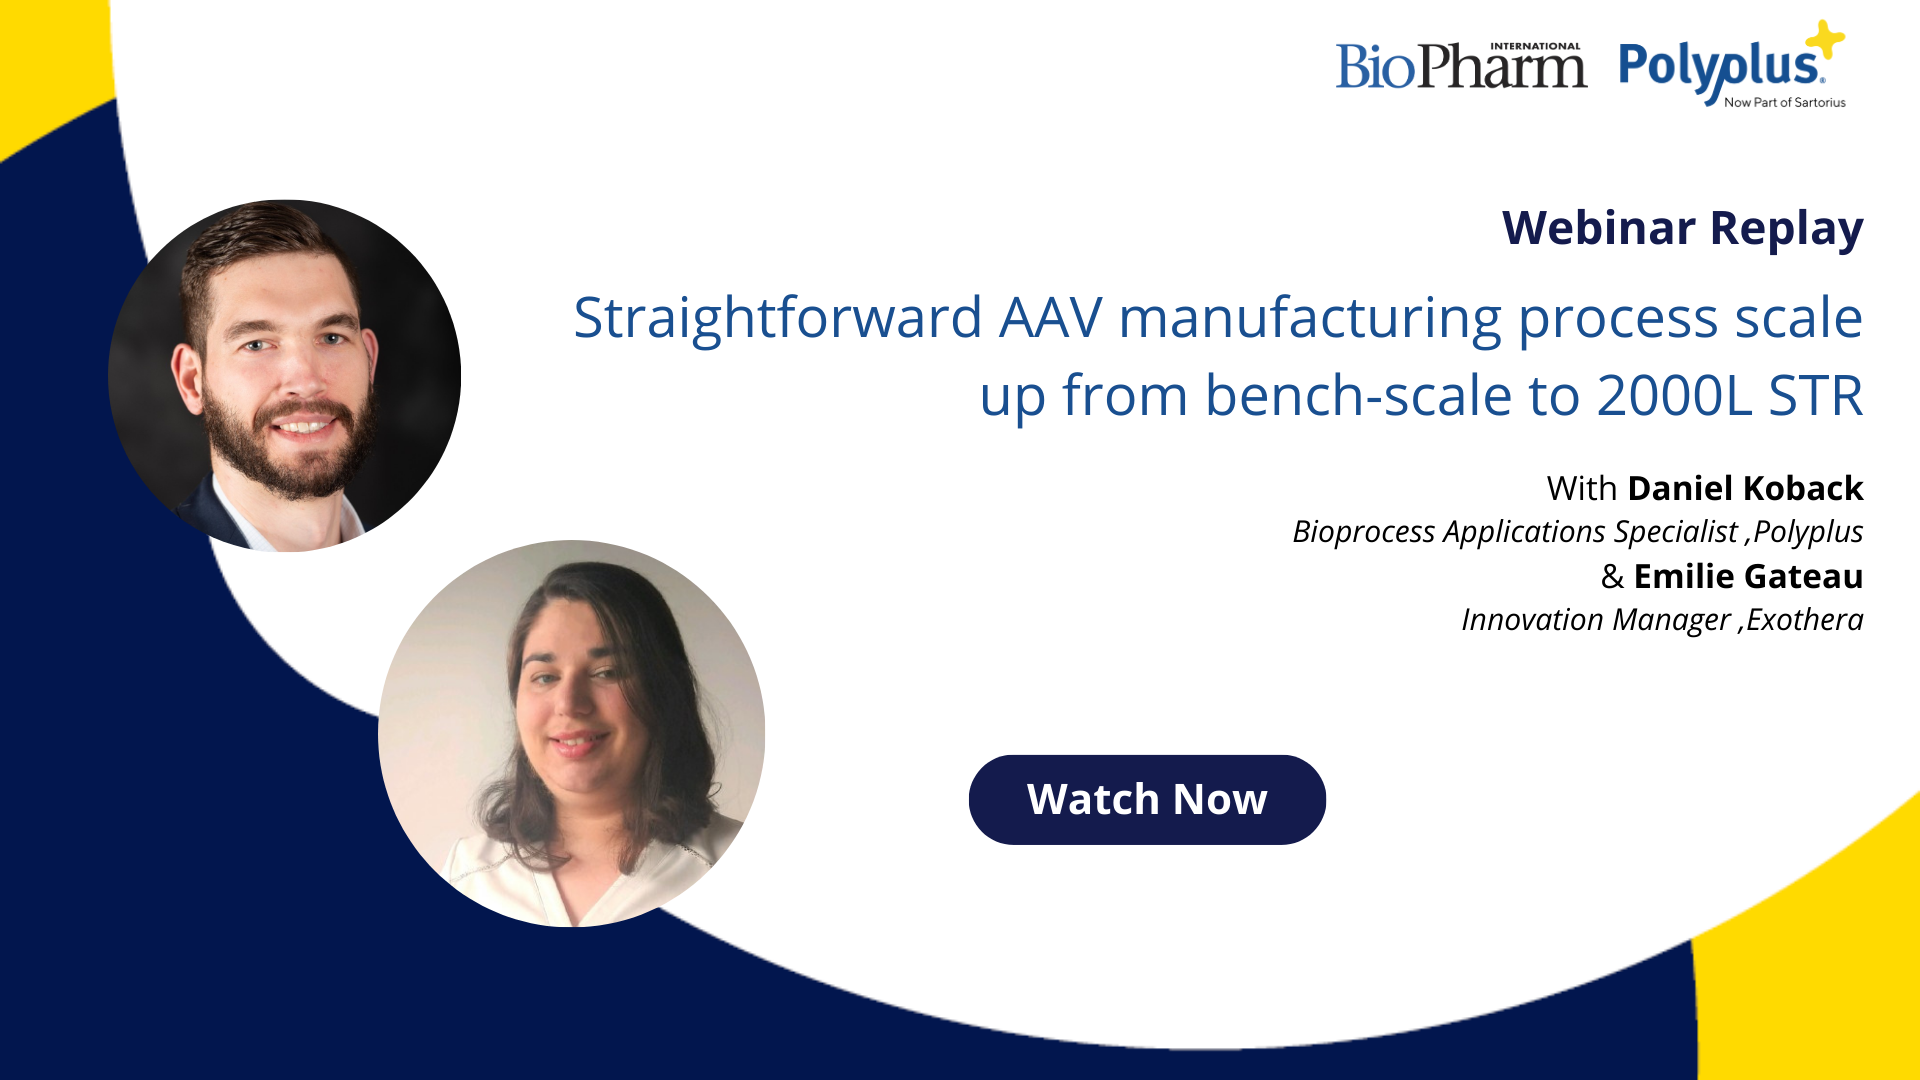 Webinar Replay : Straightforward AAV manufacturing process scale up from bench-scale to 2000L STR